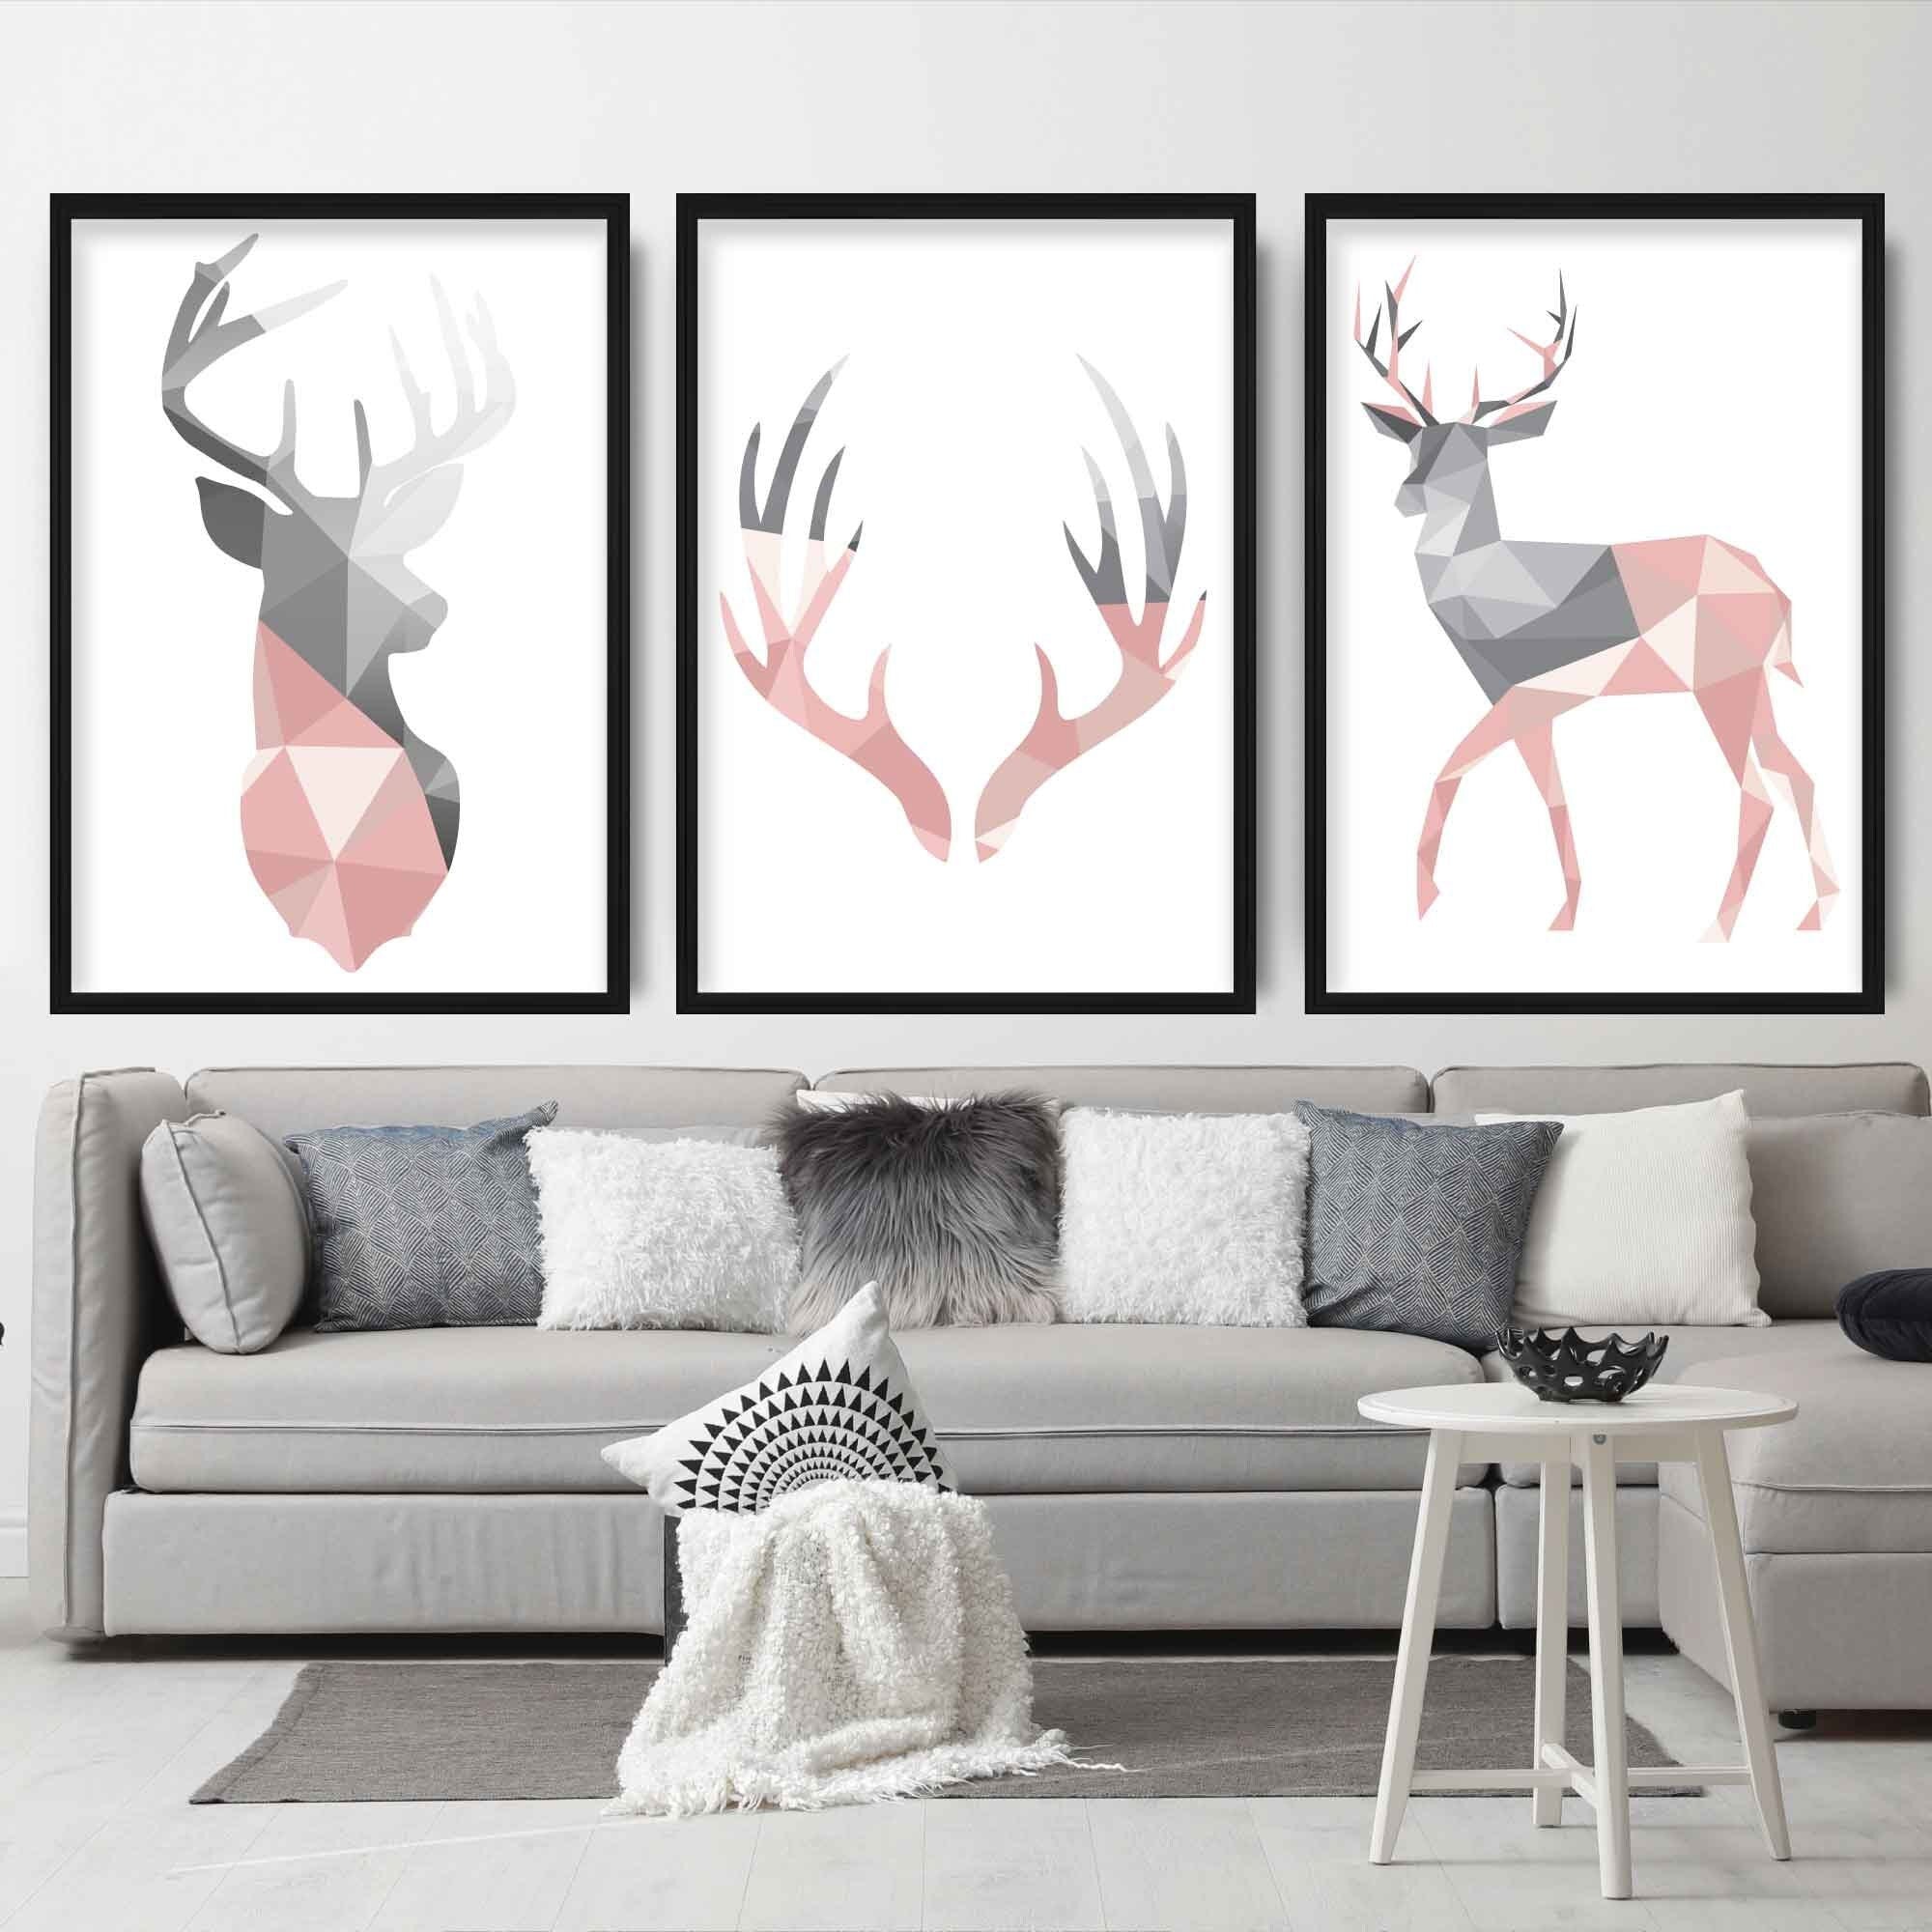 GEOMETRIC set of 3 Blush PINK & Grey Art Prints STAG Antler Gallery Wall Pictures Posters Artwork ArtzeUK